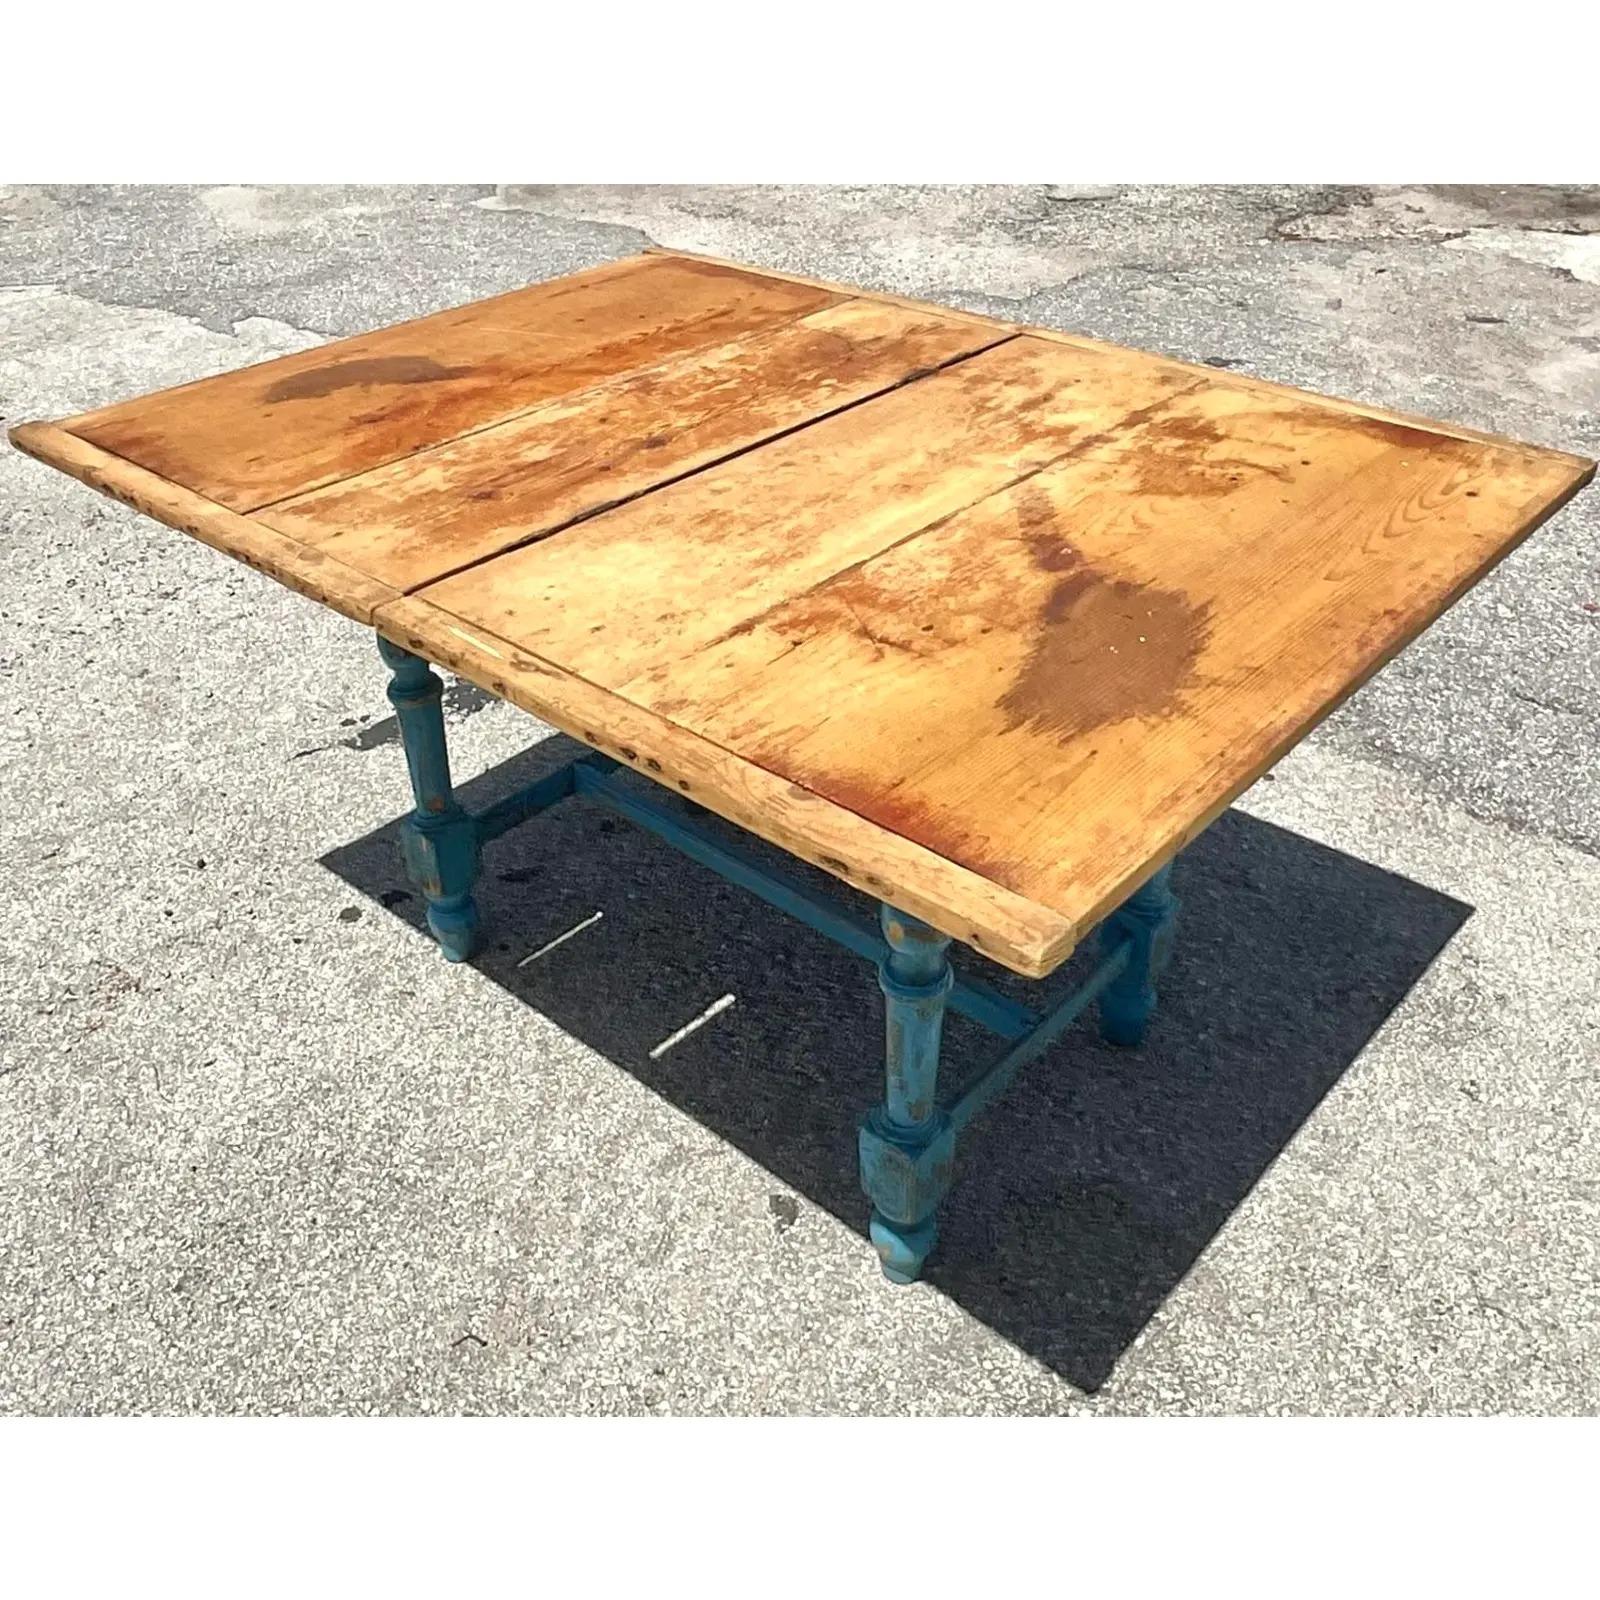 Fantastic vintage Rustic farm table. Beautiful turned legs painted a bright blue. The table top turns and flips open to create a larger surface. A fabulous all over patina from time. Lots of gnarly blemishes and stains that you look for in a farm